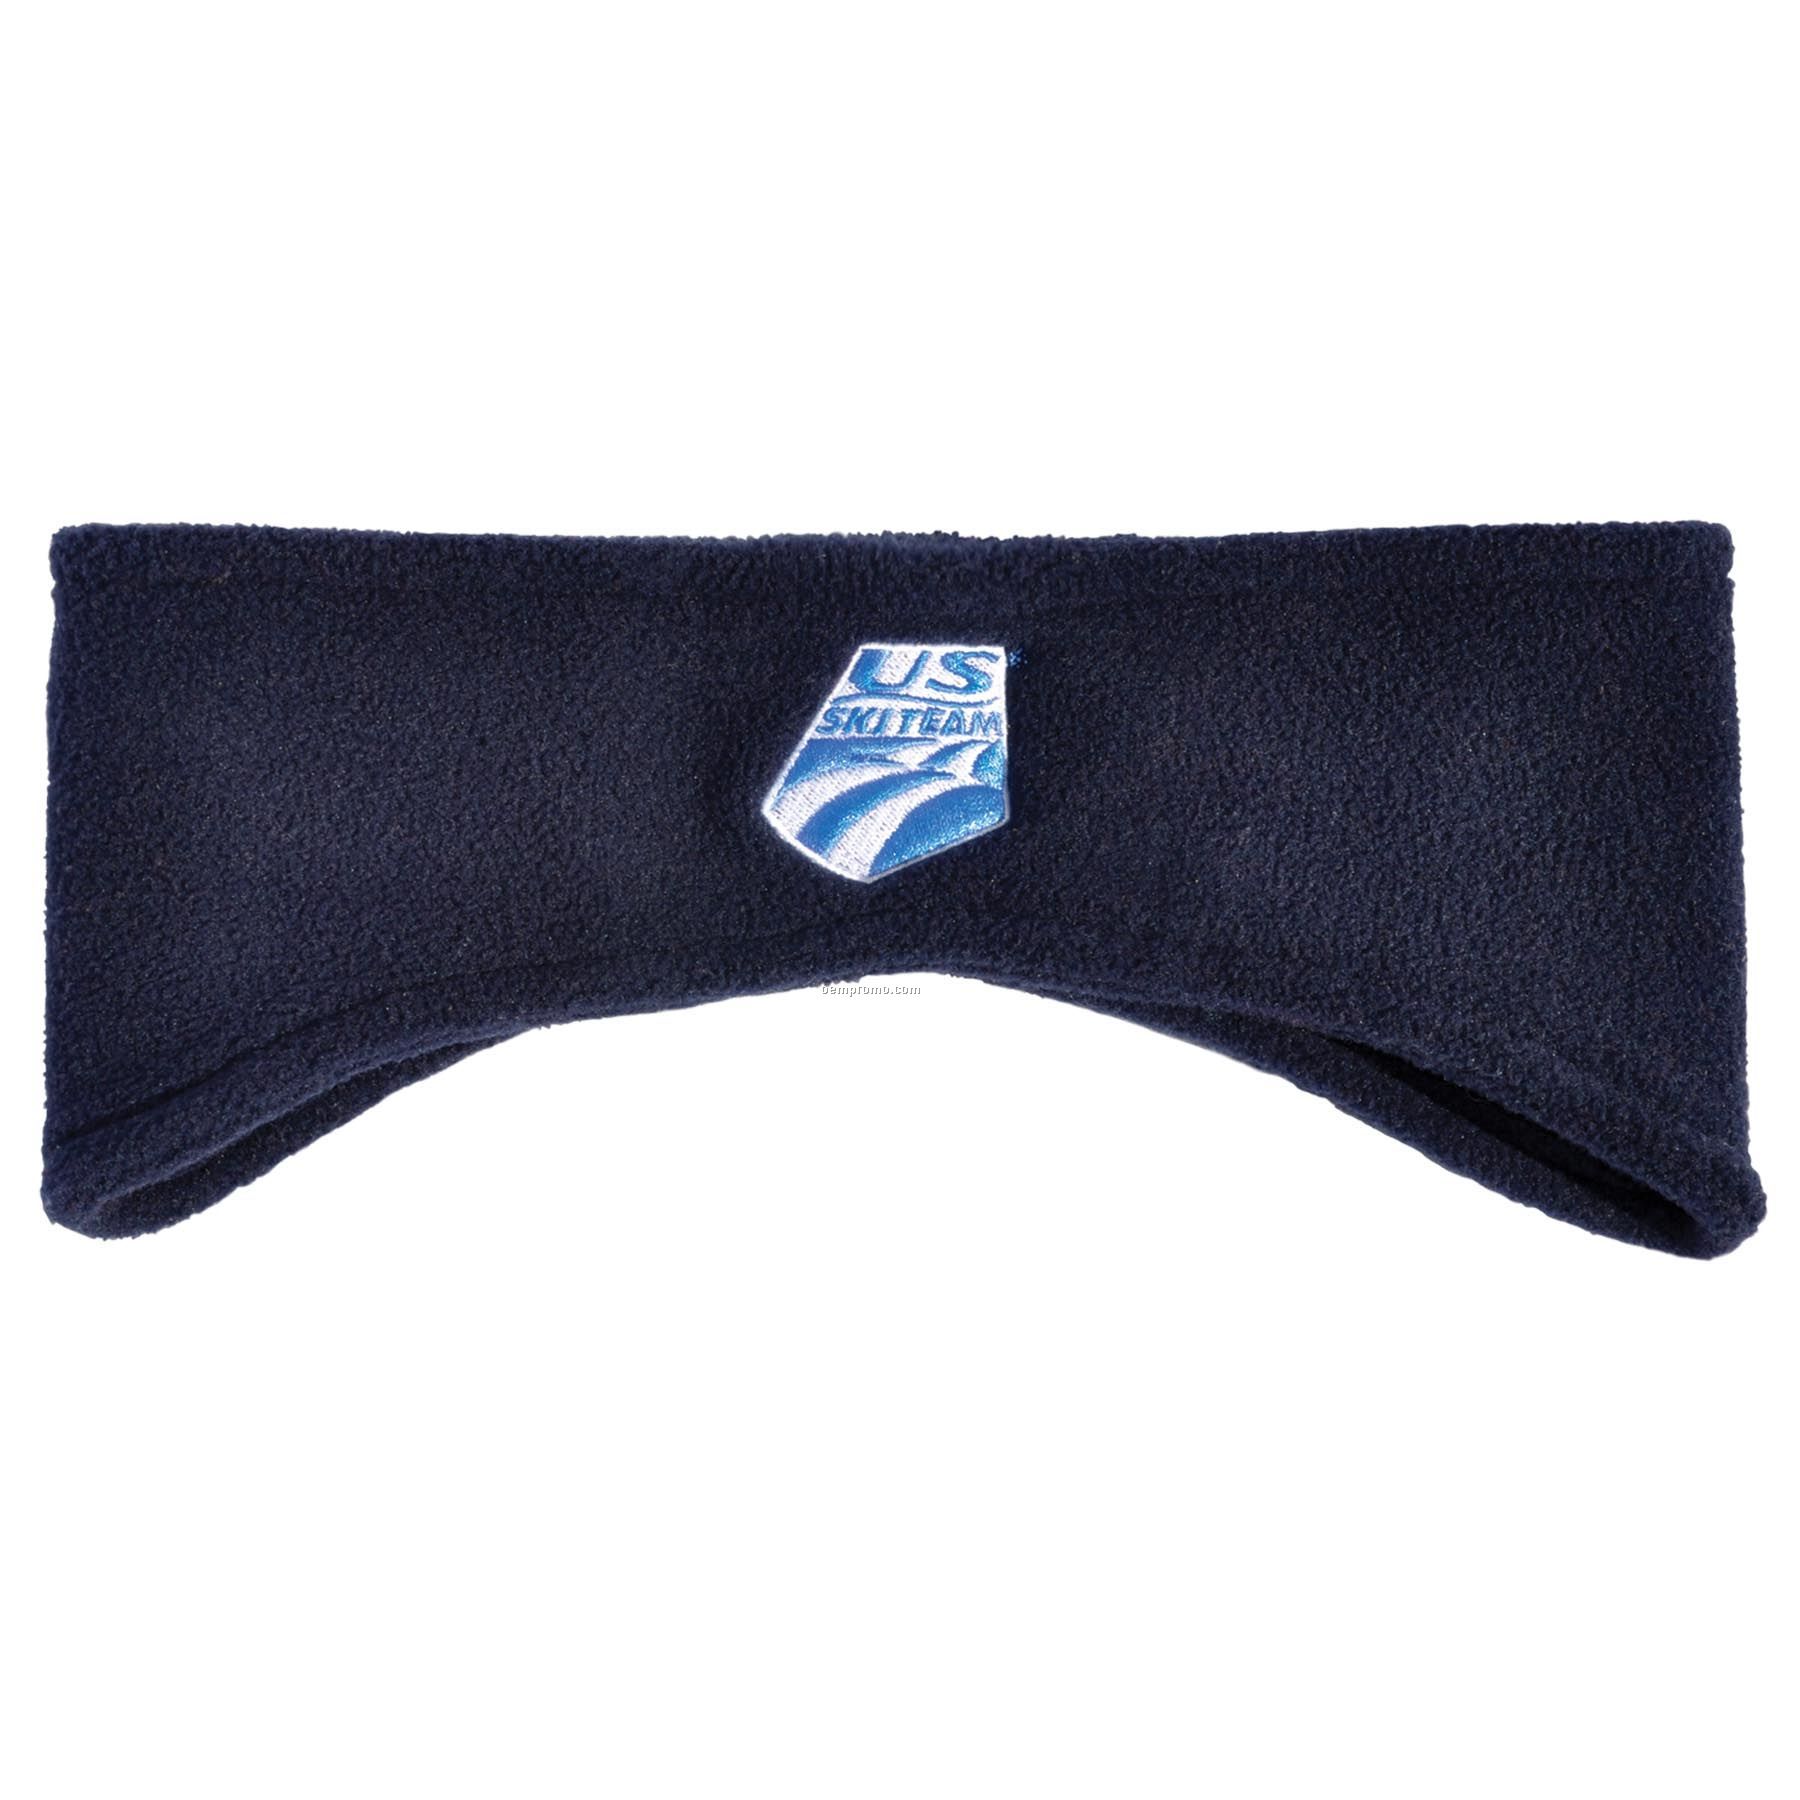 Stretch Fleece Headband / Earwarmer (Embroidered Up To 7500 Stitches)